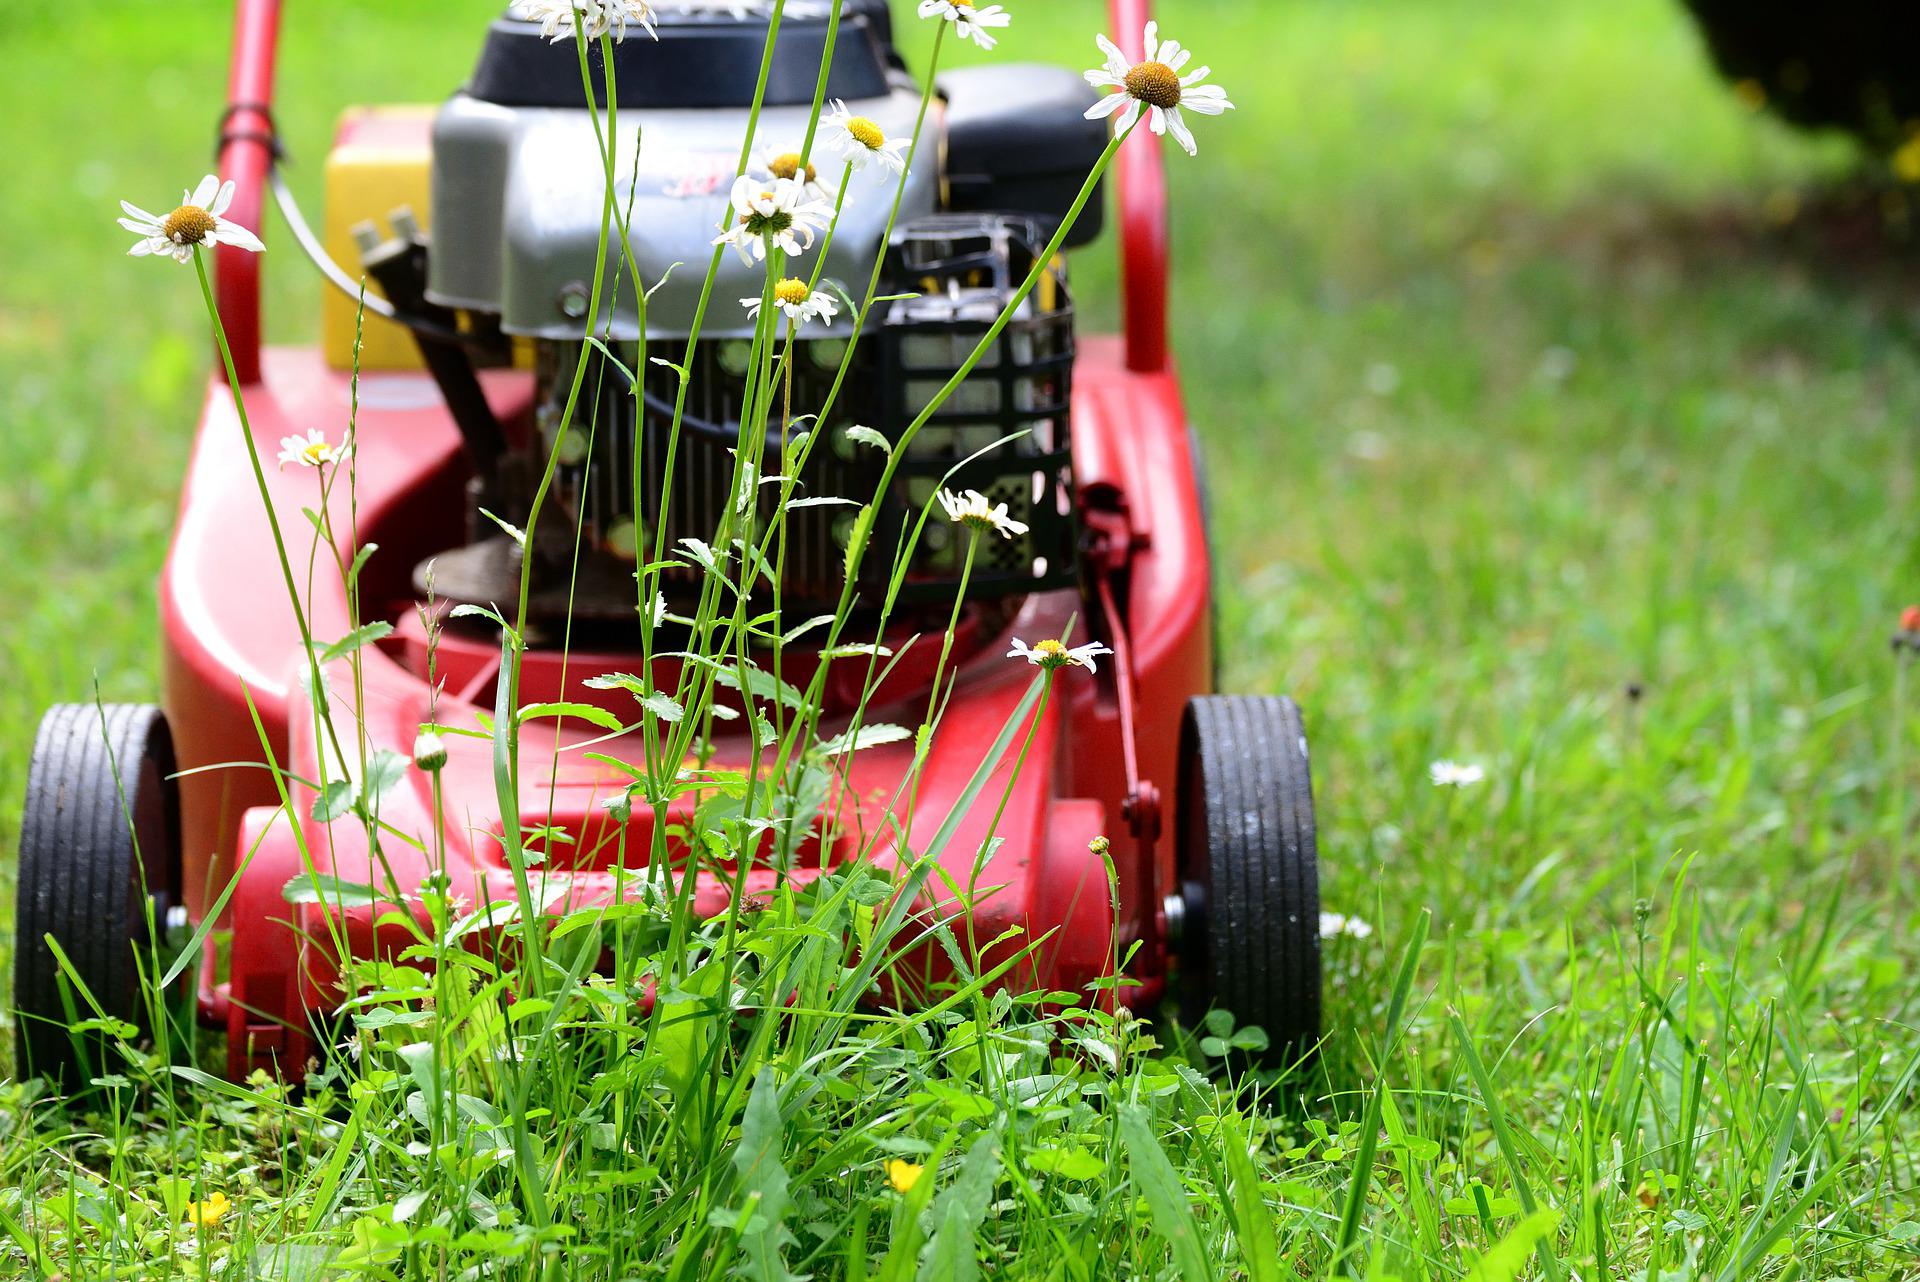 What’s The Most Common Factor When Choosing a Lawn Mower?